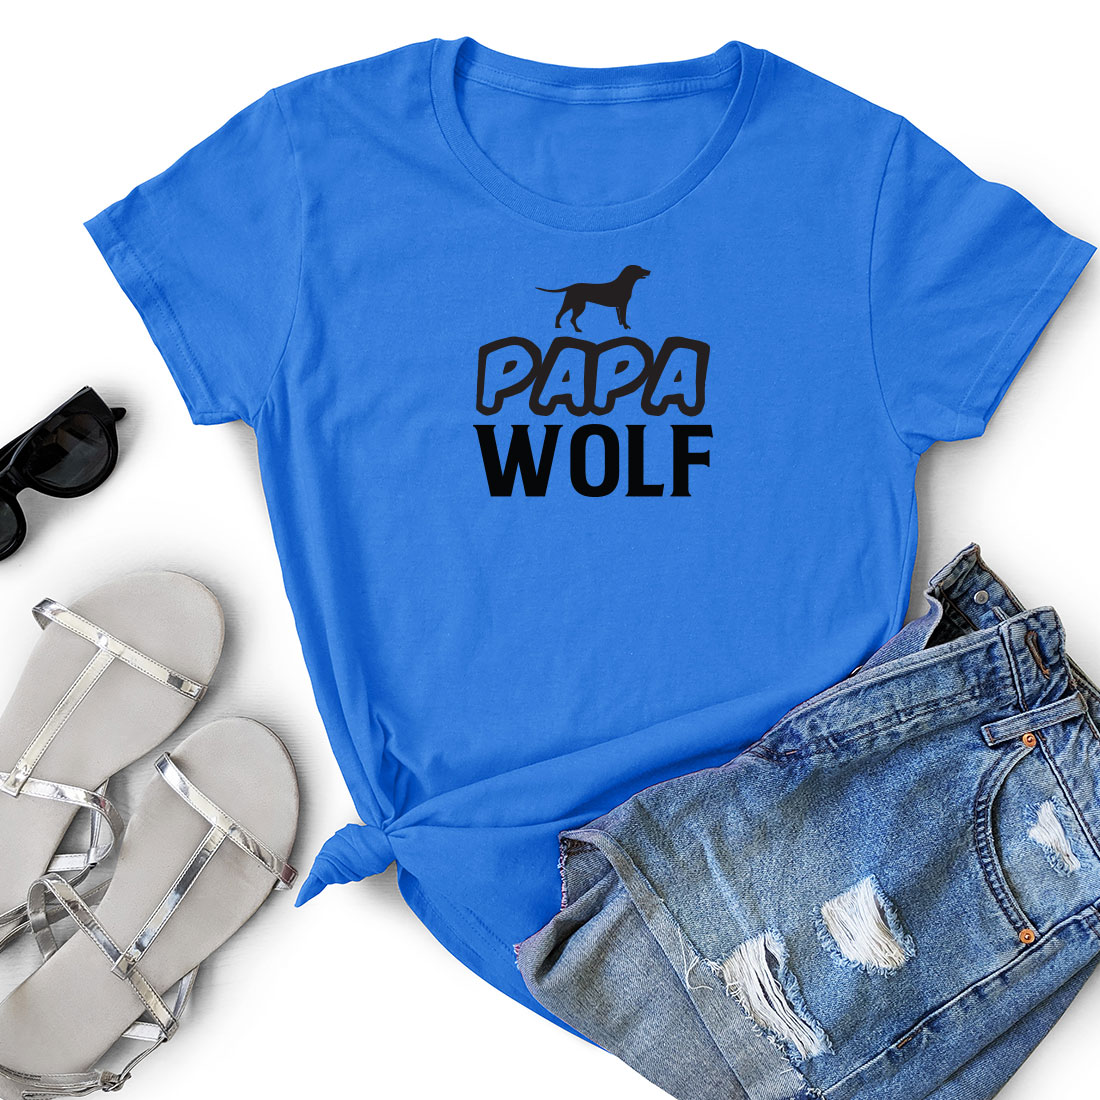 T - shirt that says papa wolf with a dog on it.